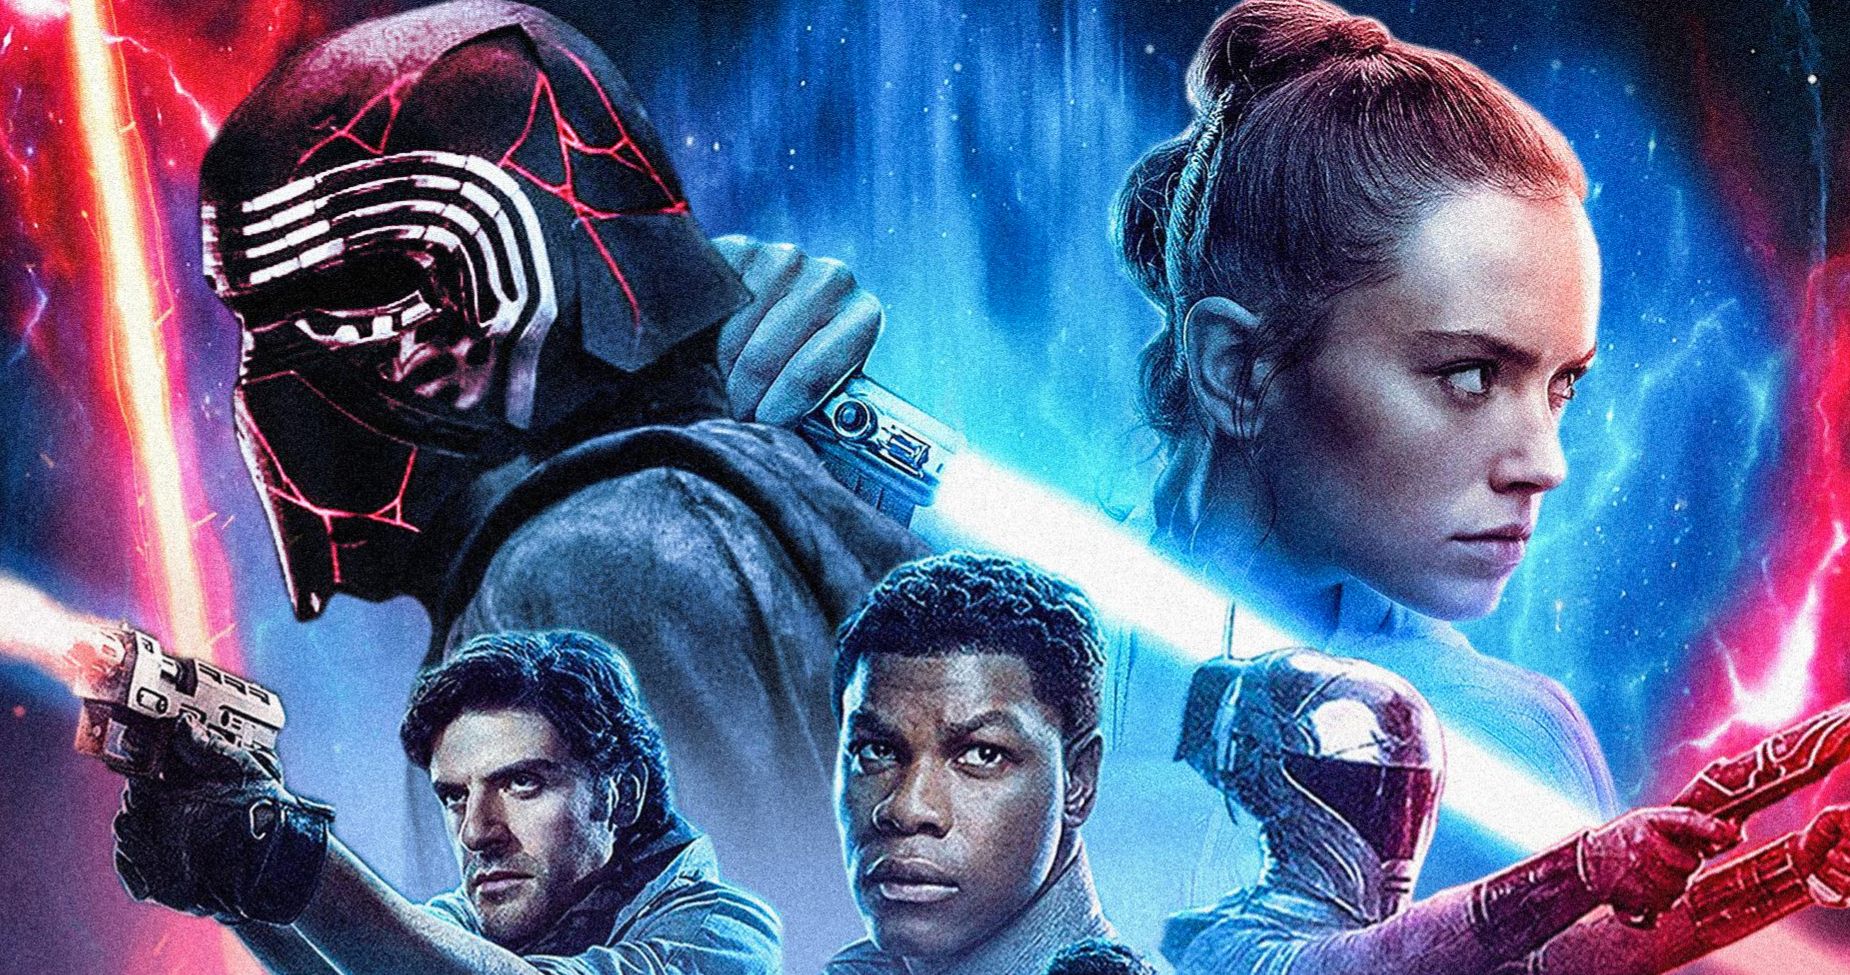 Star Wars: The Rise of Skywalker Wins 3rd Weekend at The Box Office with $33M